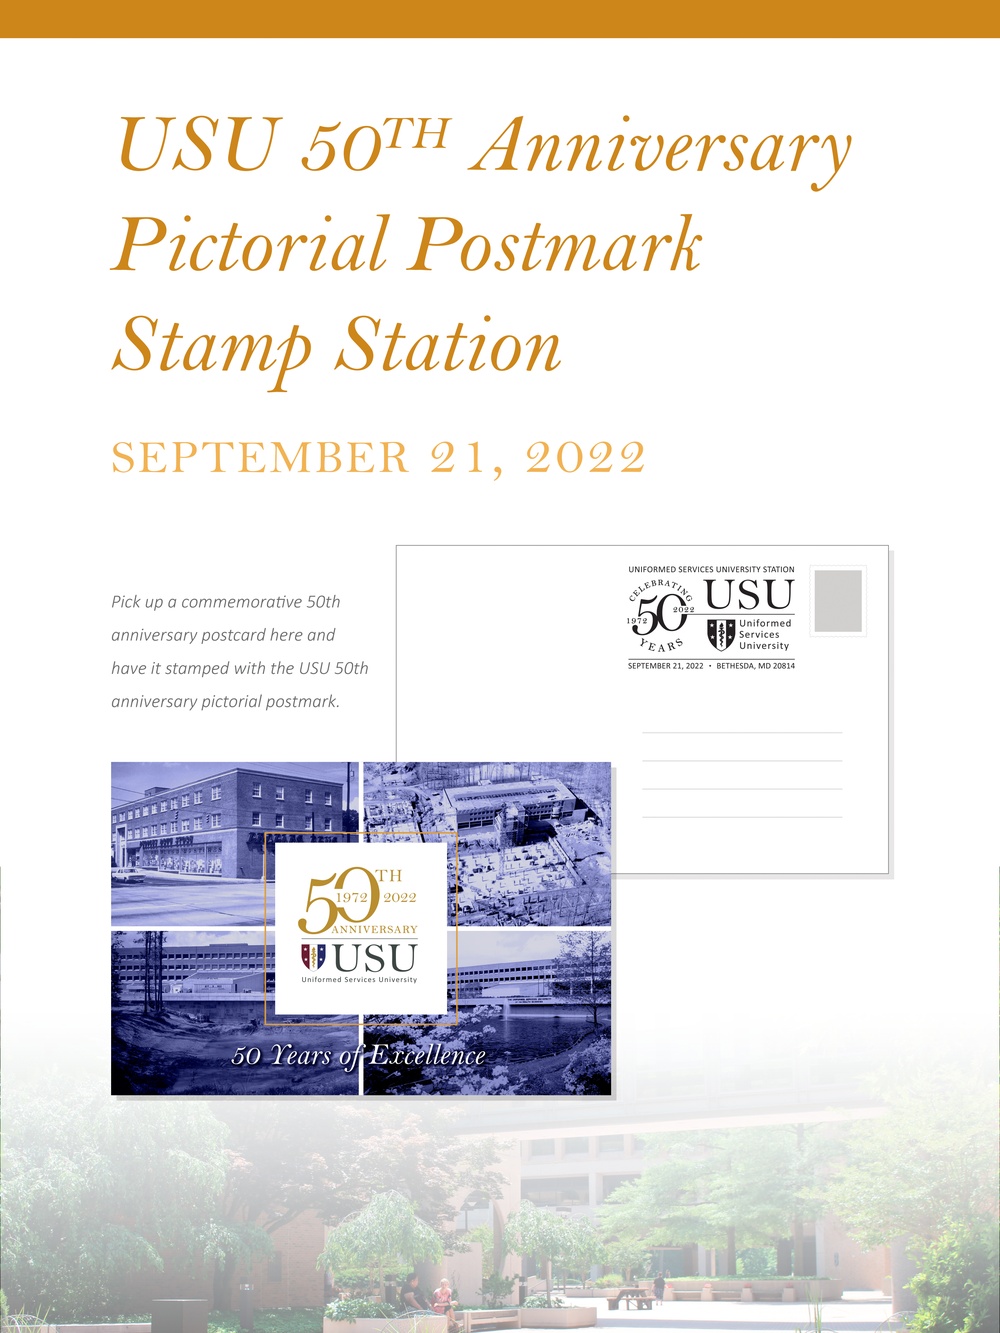 USU 50th Anniversary Pictorial Postmark Poster